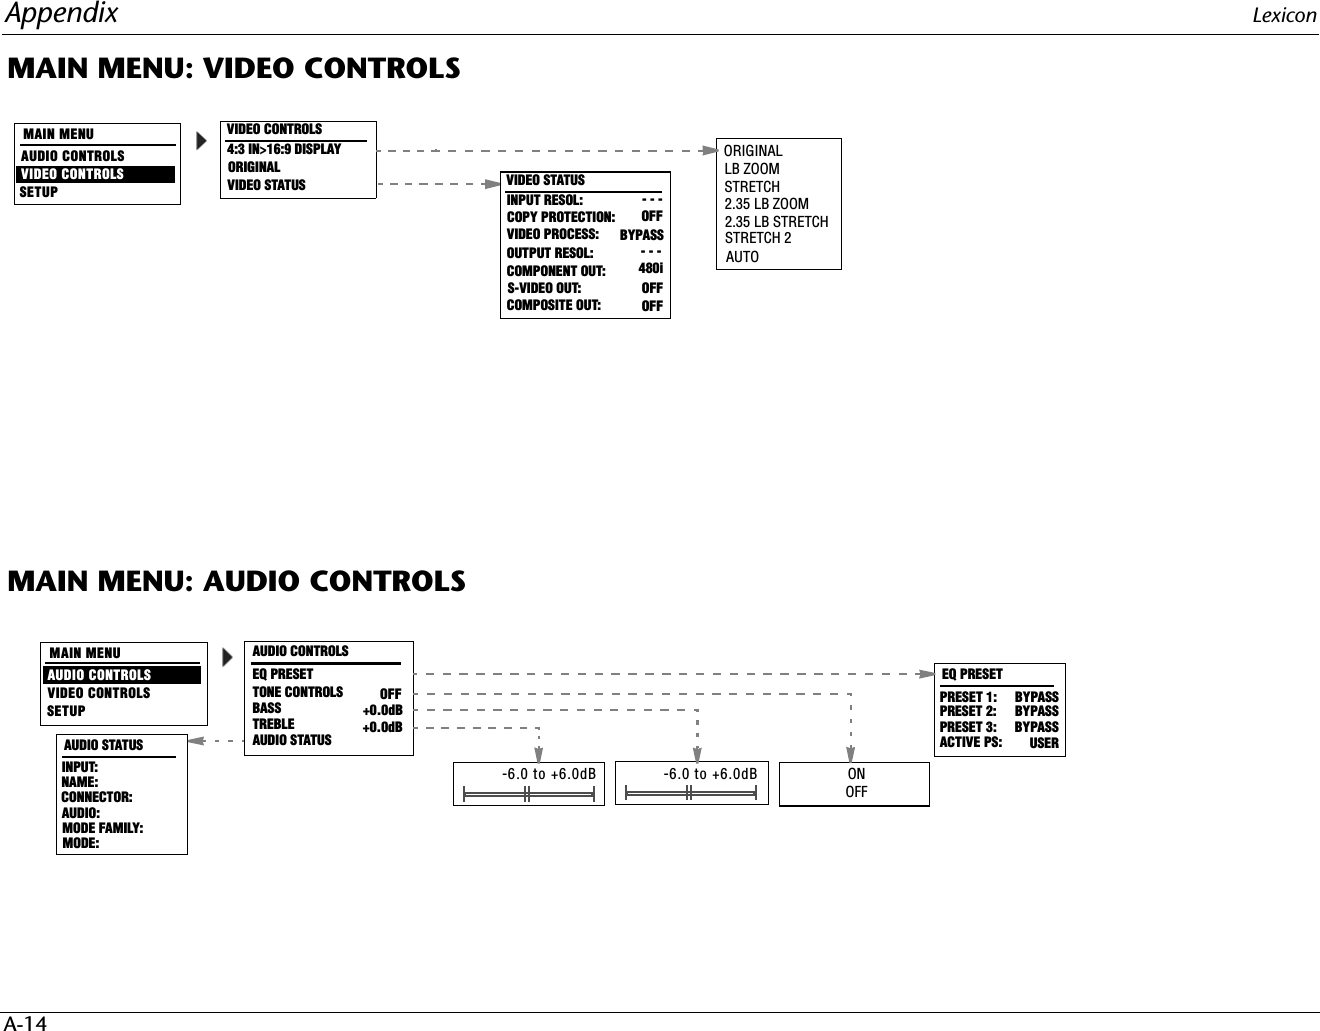 Appendix LexiconA-14LB ZOOMMAIN MENU: VIDEO CONTROLSONOFFAUDIO CONTROLSEQ PRESETTONE CONTROLSBASSTREBLEAUDIO STATUS OFF+0.0dB-6.0 to +6.0dB-6.0 to +6.0dBMAIN MENU: AUDIO CONTROLSMAIN MENUAUDIO CONTROLSVIDEO CONTROLS4:3 IN&gt;16:9 DISPLAYVIDEO STATUSORIGINALSETUPVIDEO CONTROLSINPUT RESOL: VIDEO PROCESS: OUTPUT RESOL:COMPONENT OUT:S-VIDEO OUT:COMPOSITE OUT:BYPASSVIDEO STATUSCOPY PROTECTION:AUTOSTRETCH2.35 LB ZOOMSTRETCH 22.35 LB STRETCHOFF- - -480iOFFOFF- - -MAIN MENUAUDIO CONTROLSVIDEO CONTROLSSETUP+0.0dBEQ PRESETPRESET 1:  BYPASSACTIVE PS:  USERPRESET 2:  BYPASSPRESET 3:  BYPASSAUDIO STATUSINPUT: MODE FAMILY:AUDIO: NAME: MODE:CONNECTOR: ORIGINAL